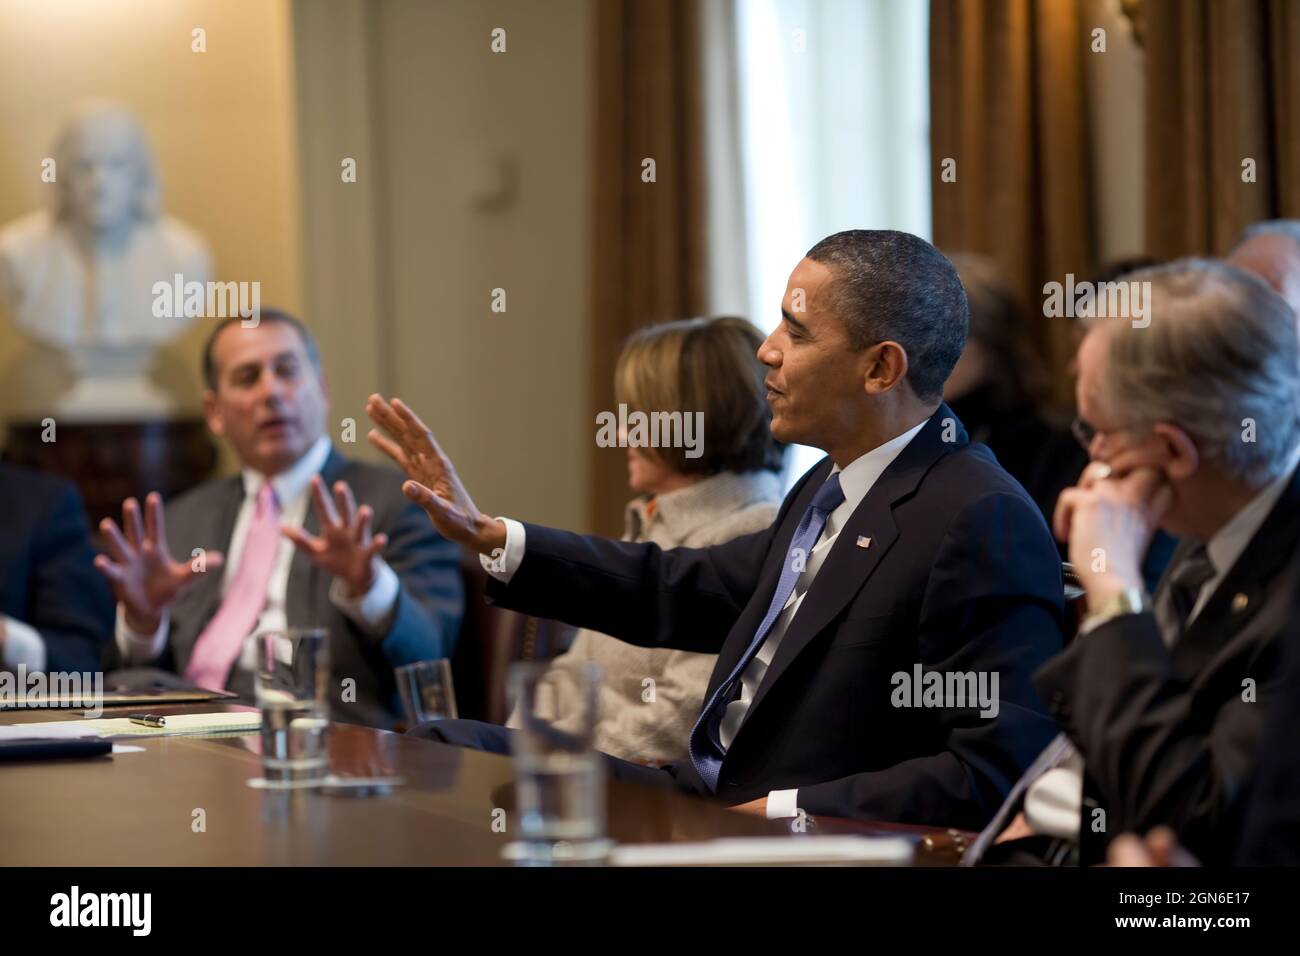 President Barack Obama and House Republican Leader John A. Boehner (R-Ohio) gesture while Speaker of the House Nancy Pelosi (D-Cal.) and Senate Majority Leader Harry Reid (D-Nev.) look on during a meeting of bipartisan leaders of the House and Senate to discuss working together on issues surrounding the economy and jobs in the Cabinet Room of the White House, Feb. 10, 2010.  (Official White House Photo by Pete Souza) This official White House photograph is being made available only for publication by news organizations and/or for personal use printing by the subject(s) of the photograph. The p Stock Photo